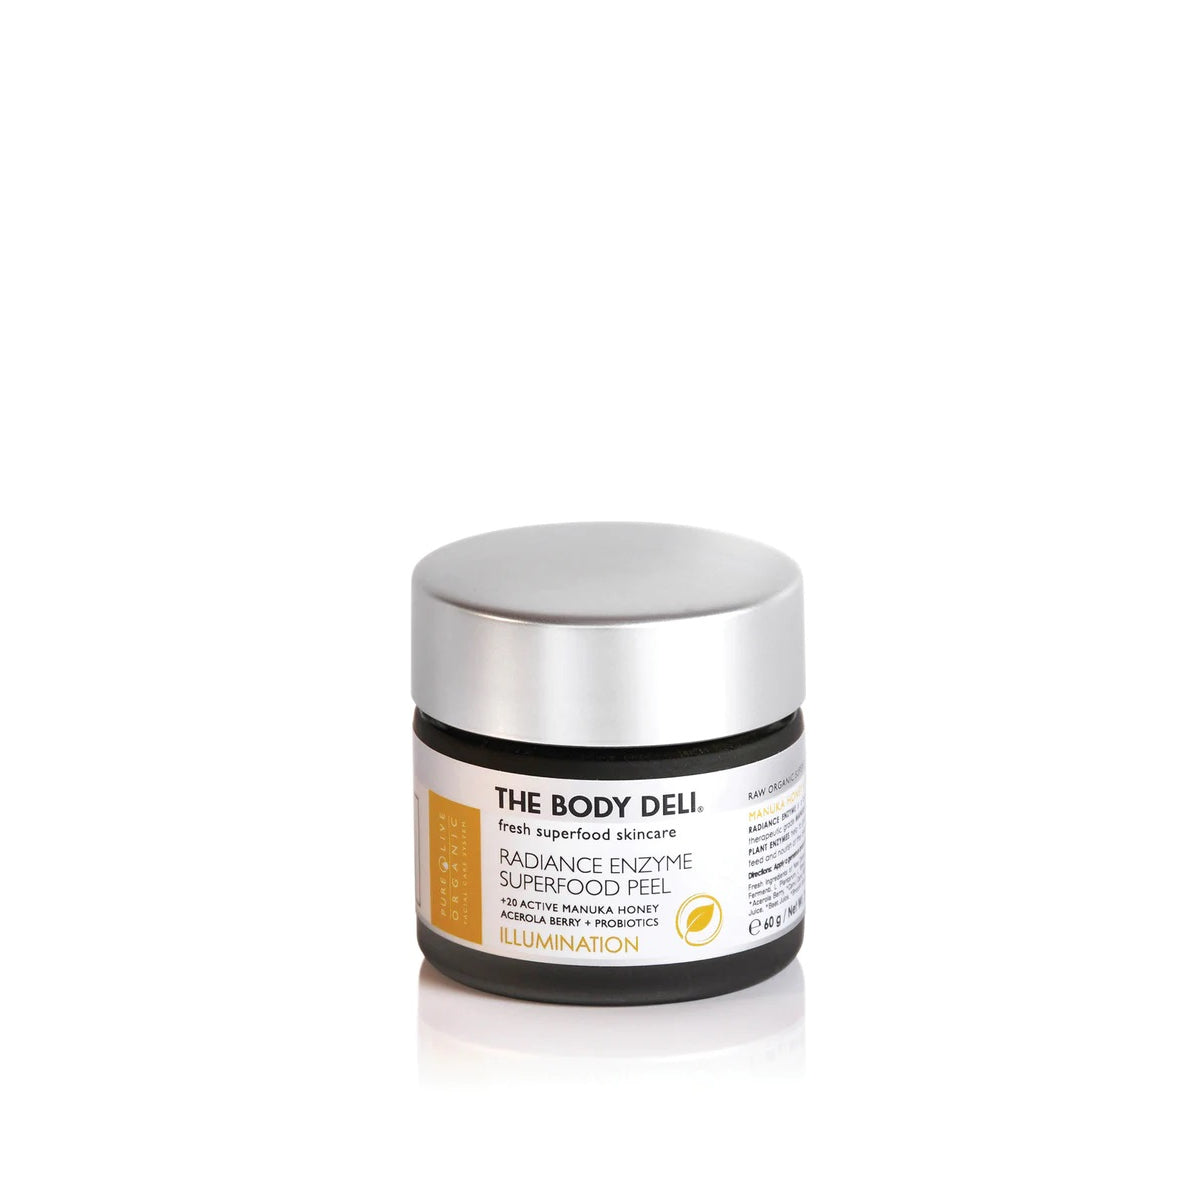 THE BODY DELI RADIANCE ENZYME SUPERFOOD Peel full size